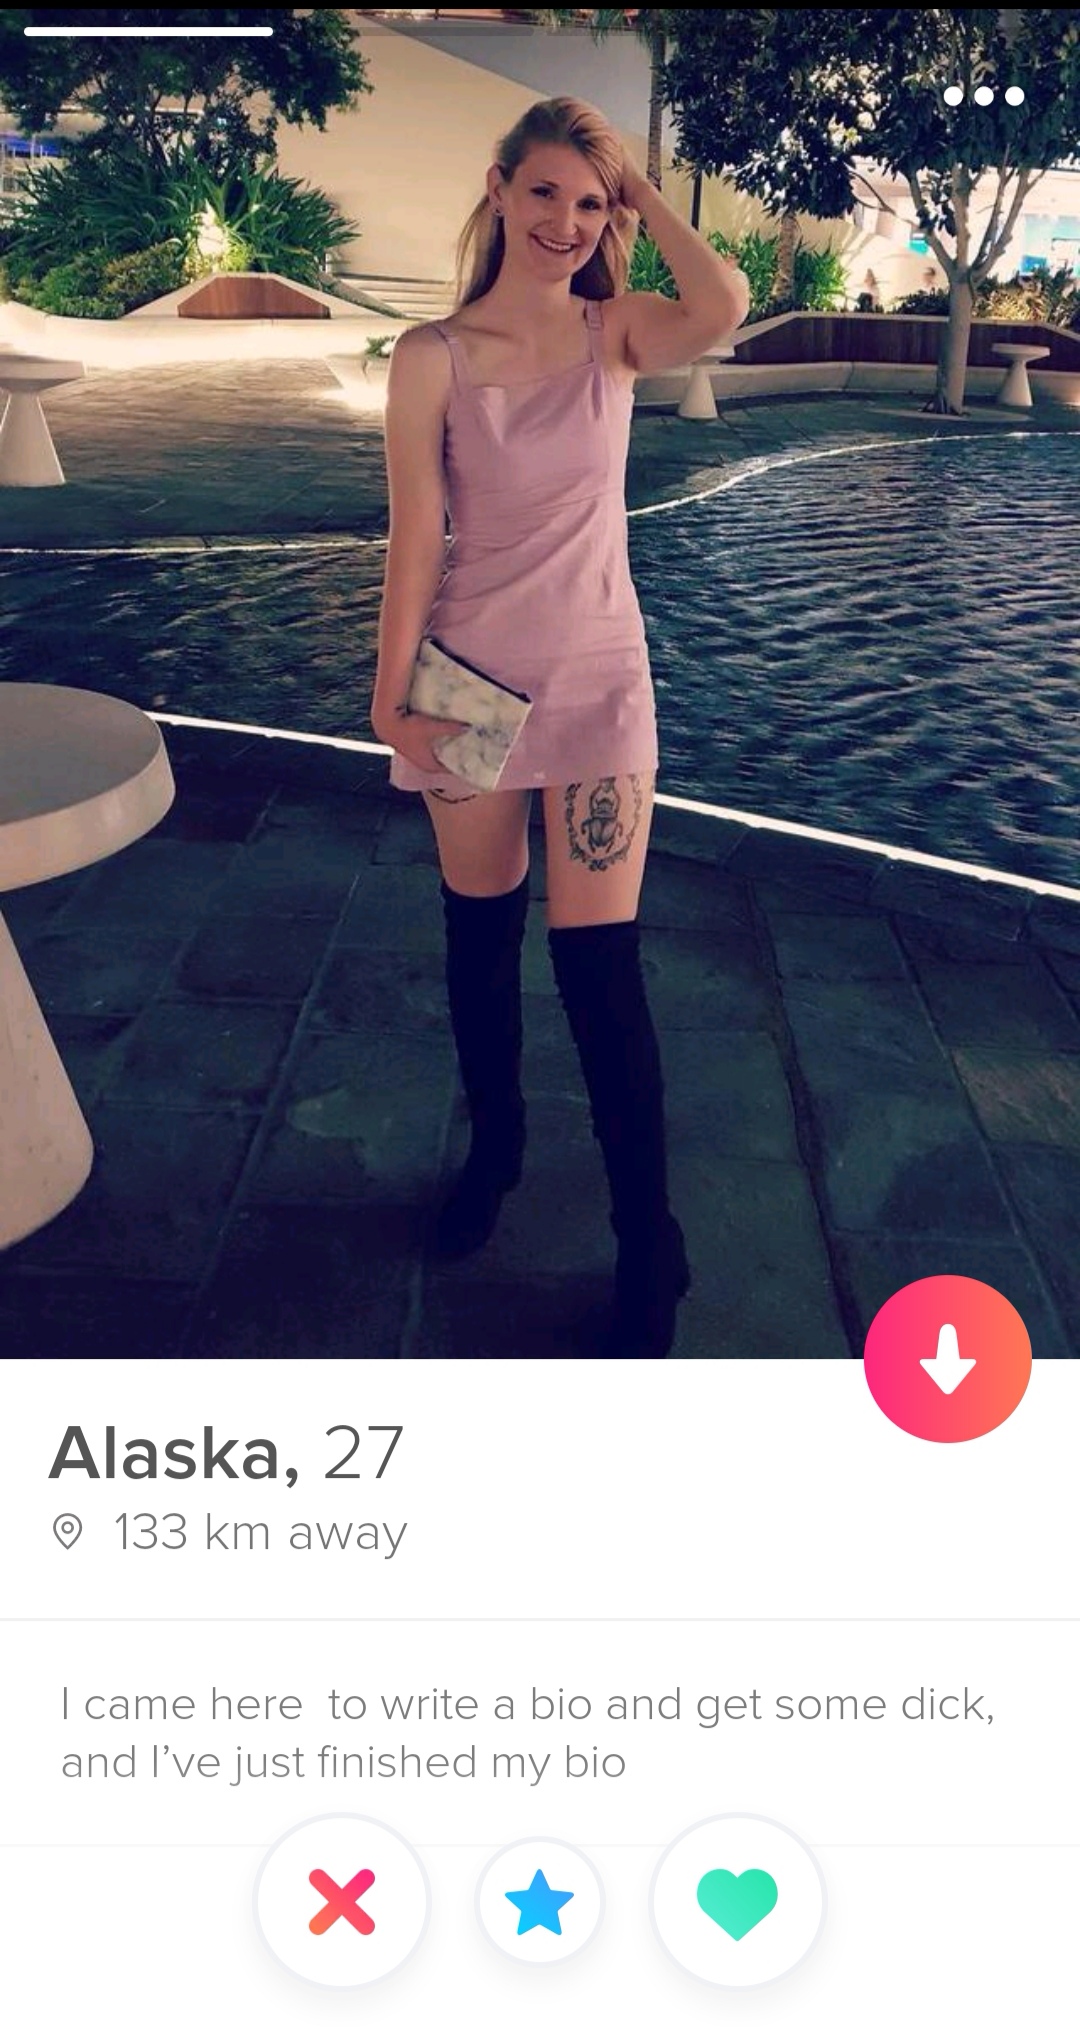 shoulder - Alaska, 27 133 km away I came here to write a bio and get some dick, and I've just finished my blo